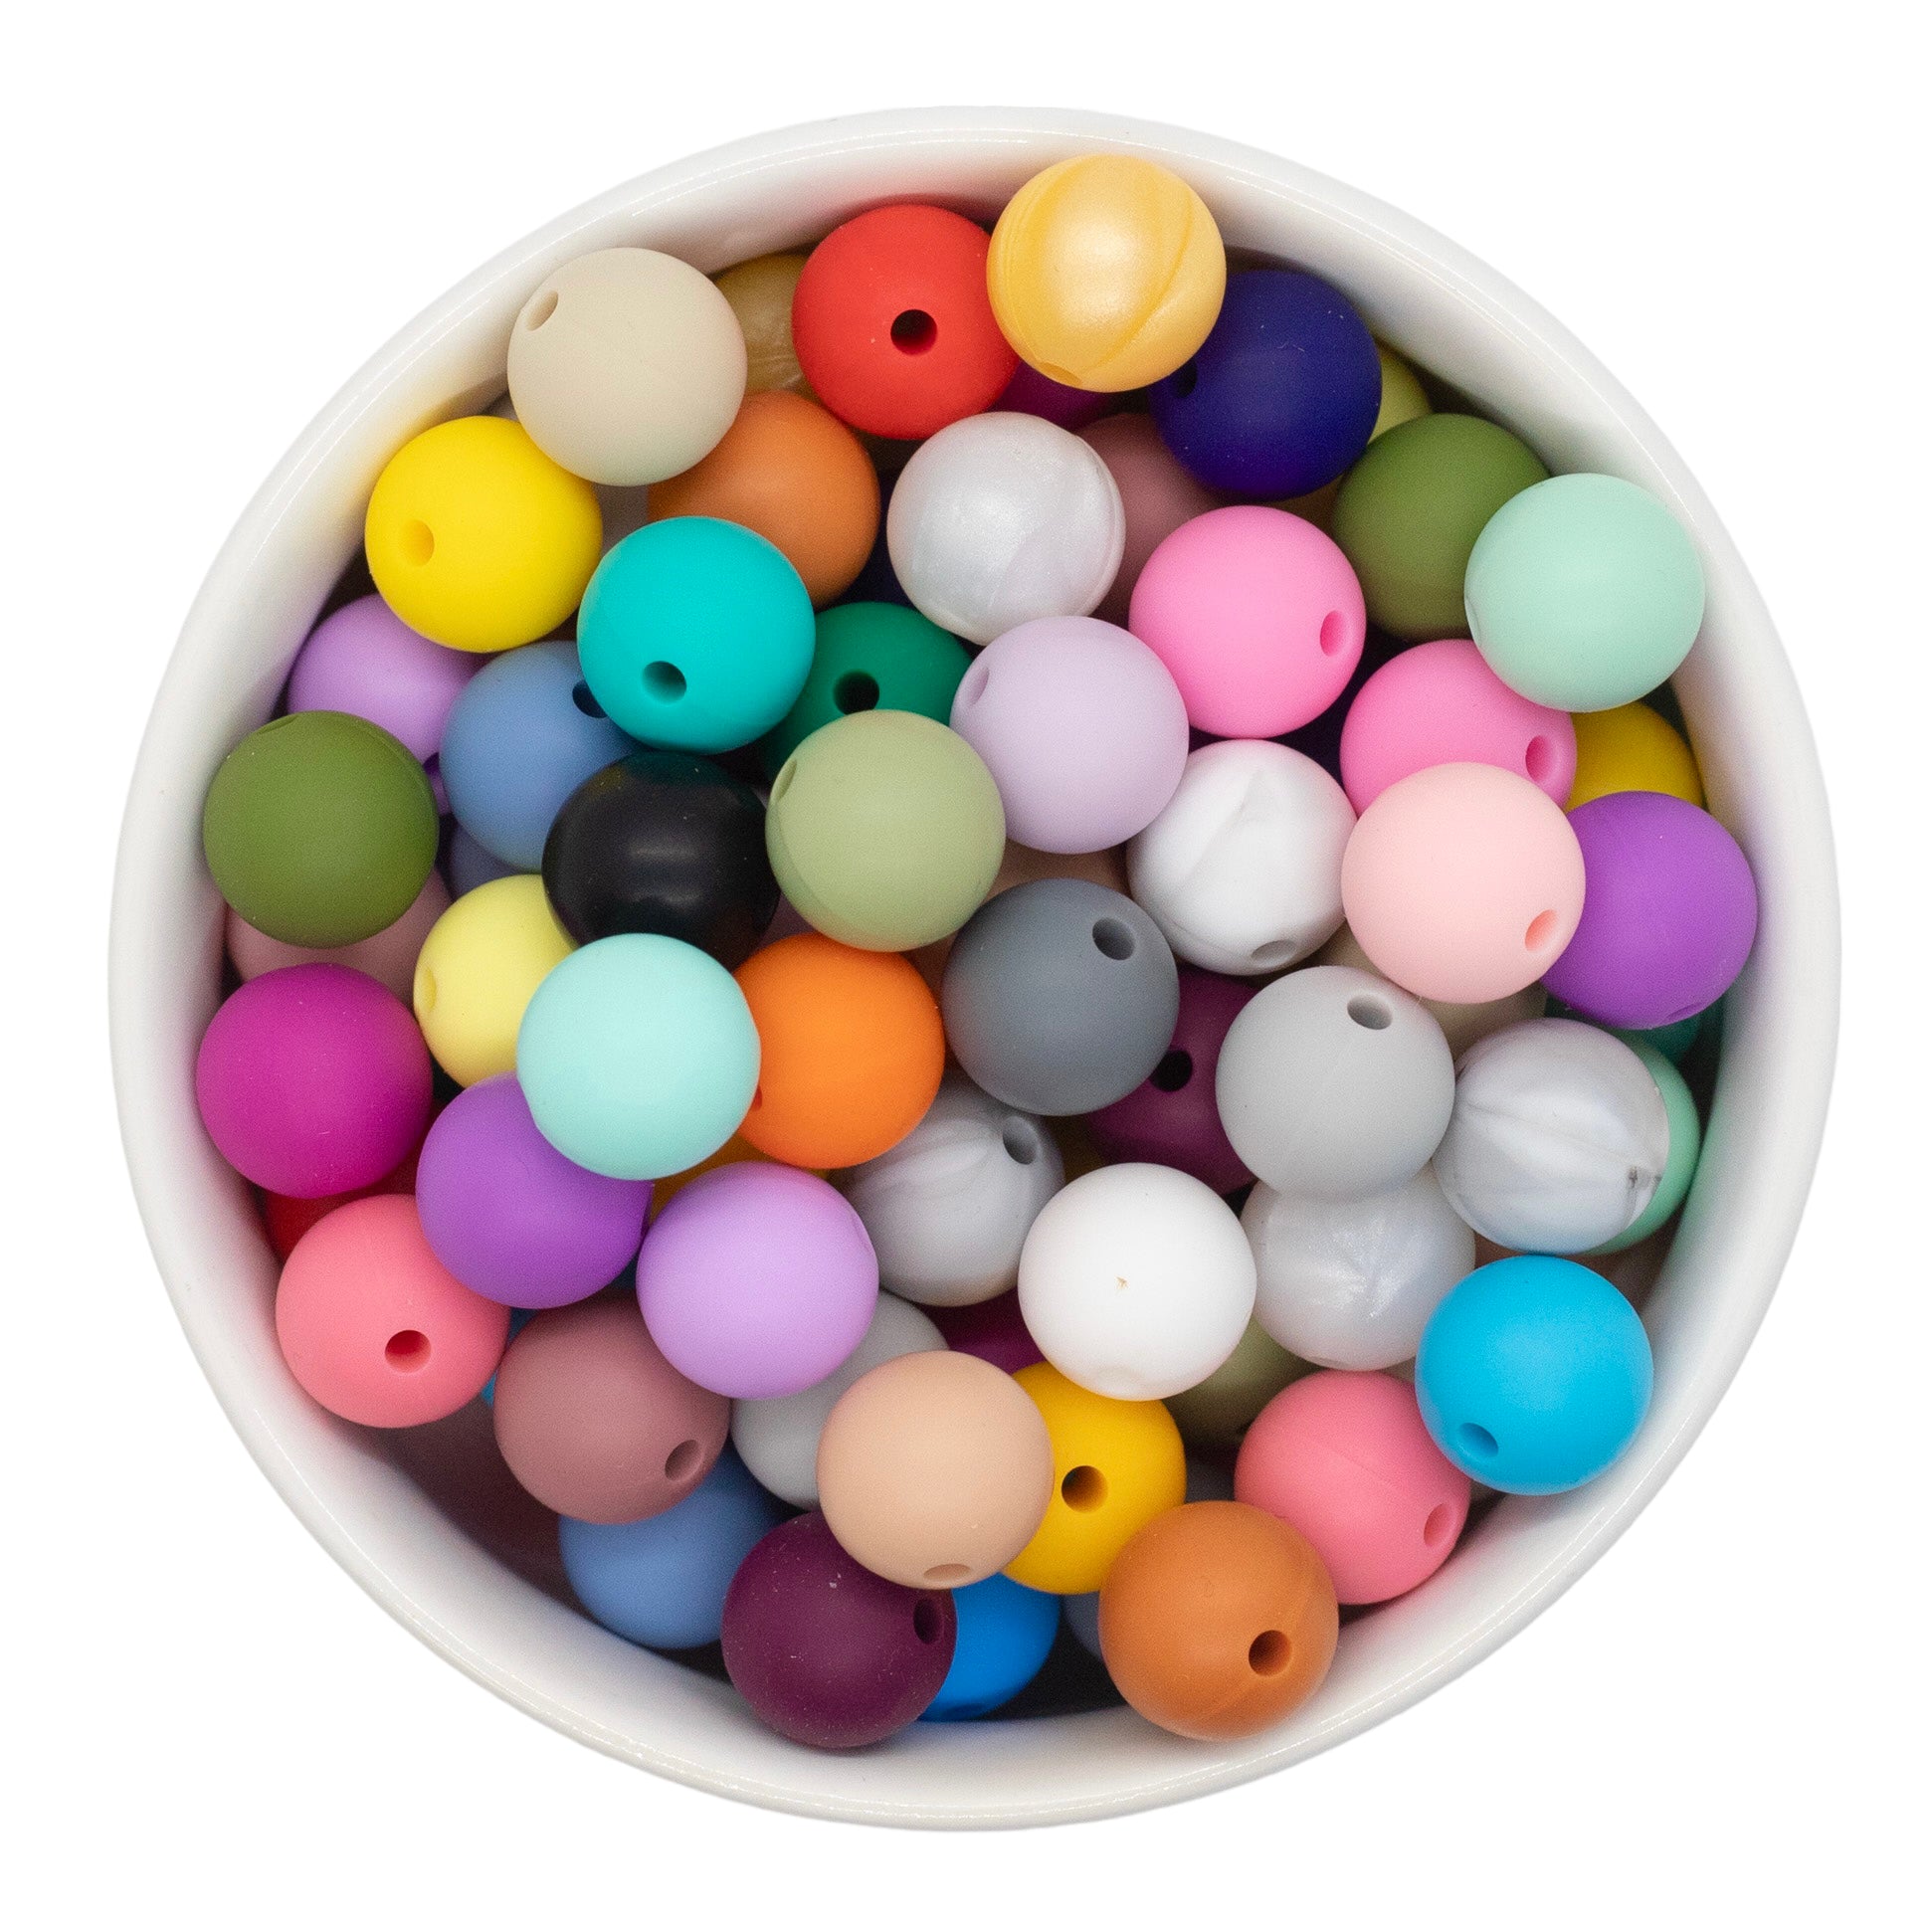 12mm Silicone Beads, 100PCS Silicone Beads Bulk Spacer Beads Focal